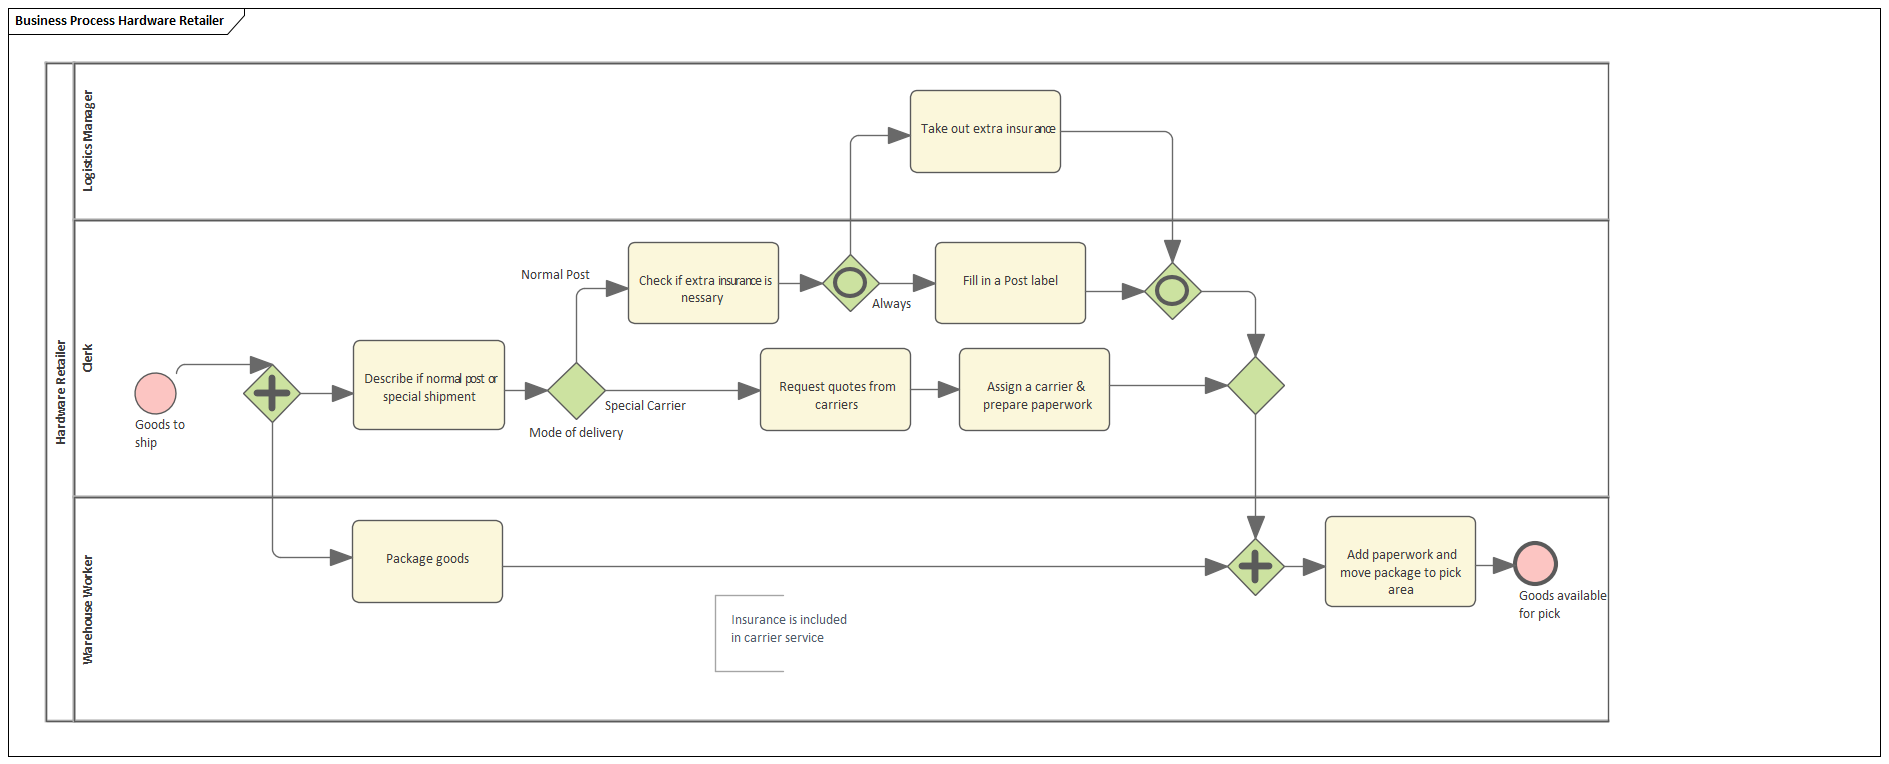 BPMN Business Process model for simulation in Sparx Systems Enterprise Architect